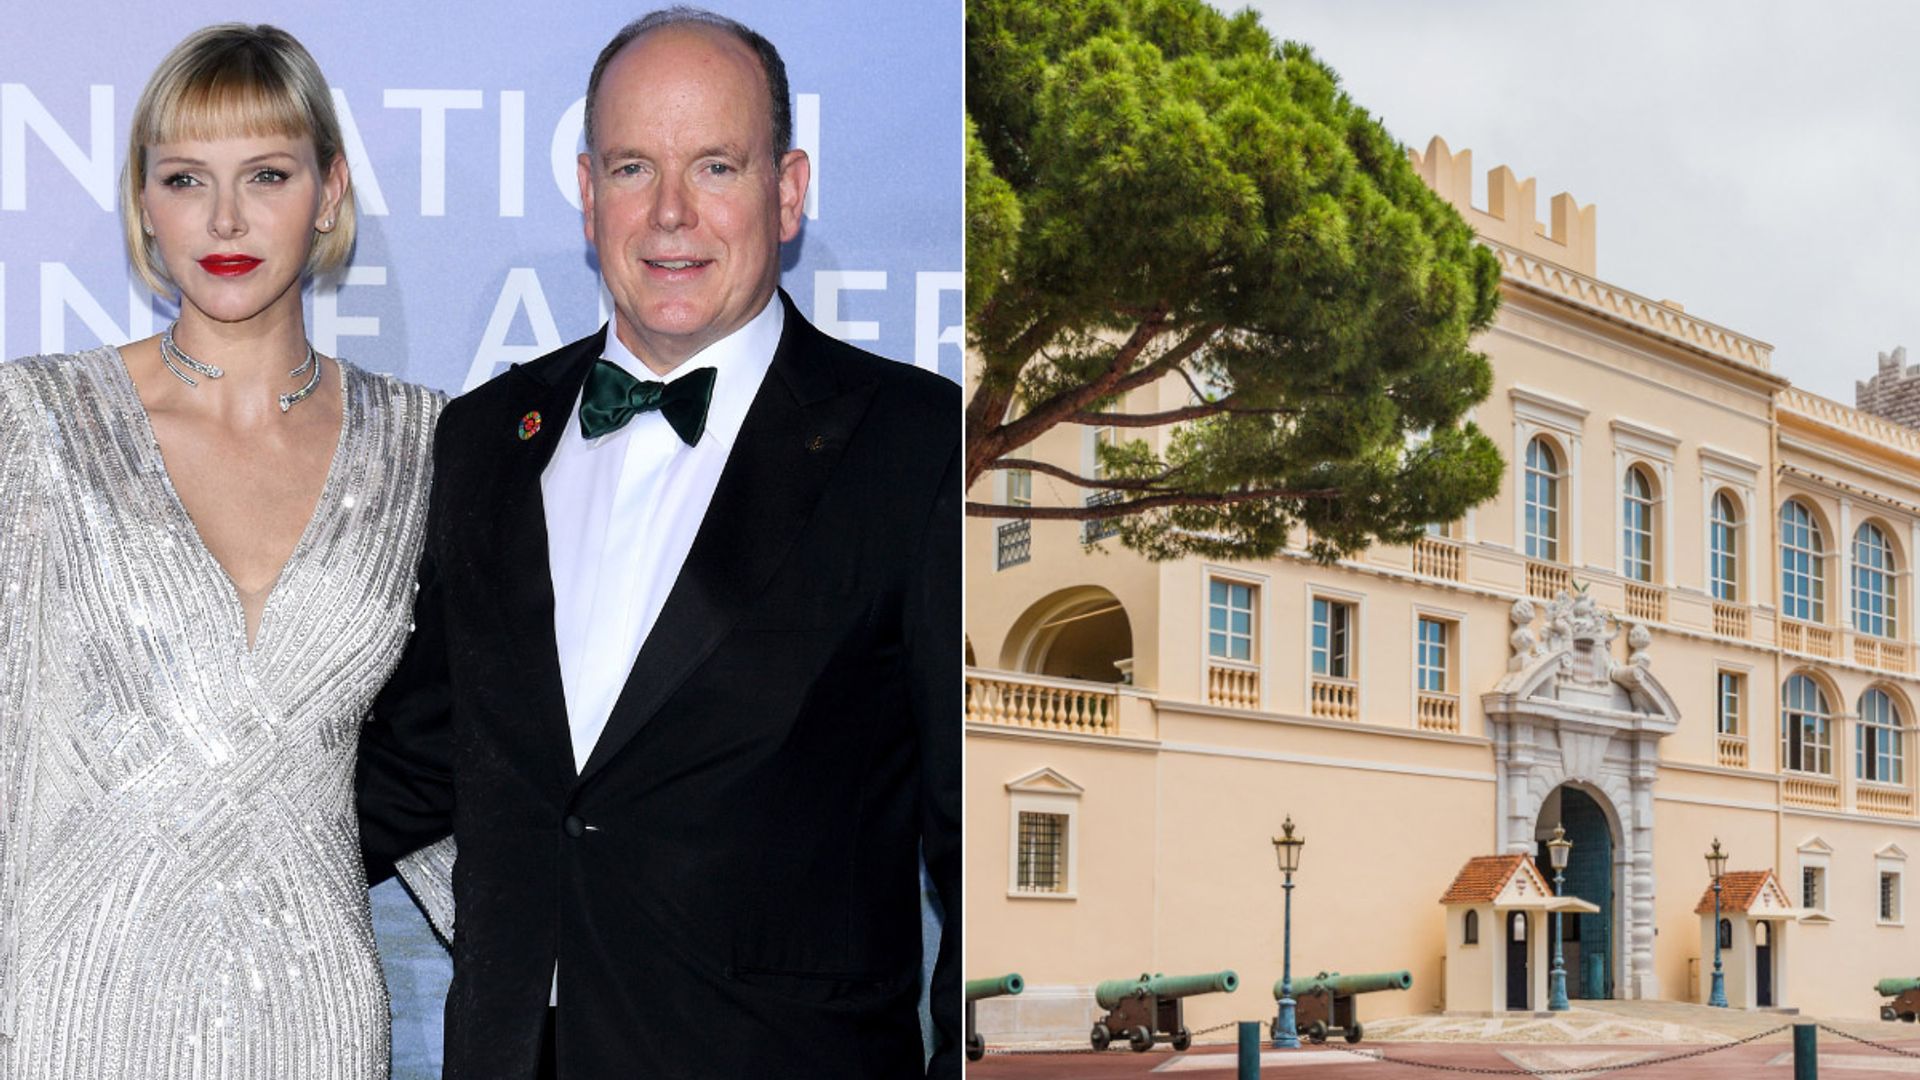 Princess Charlene and Prince Albert's Monaco home is paradise in latest family photo